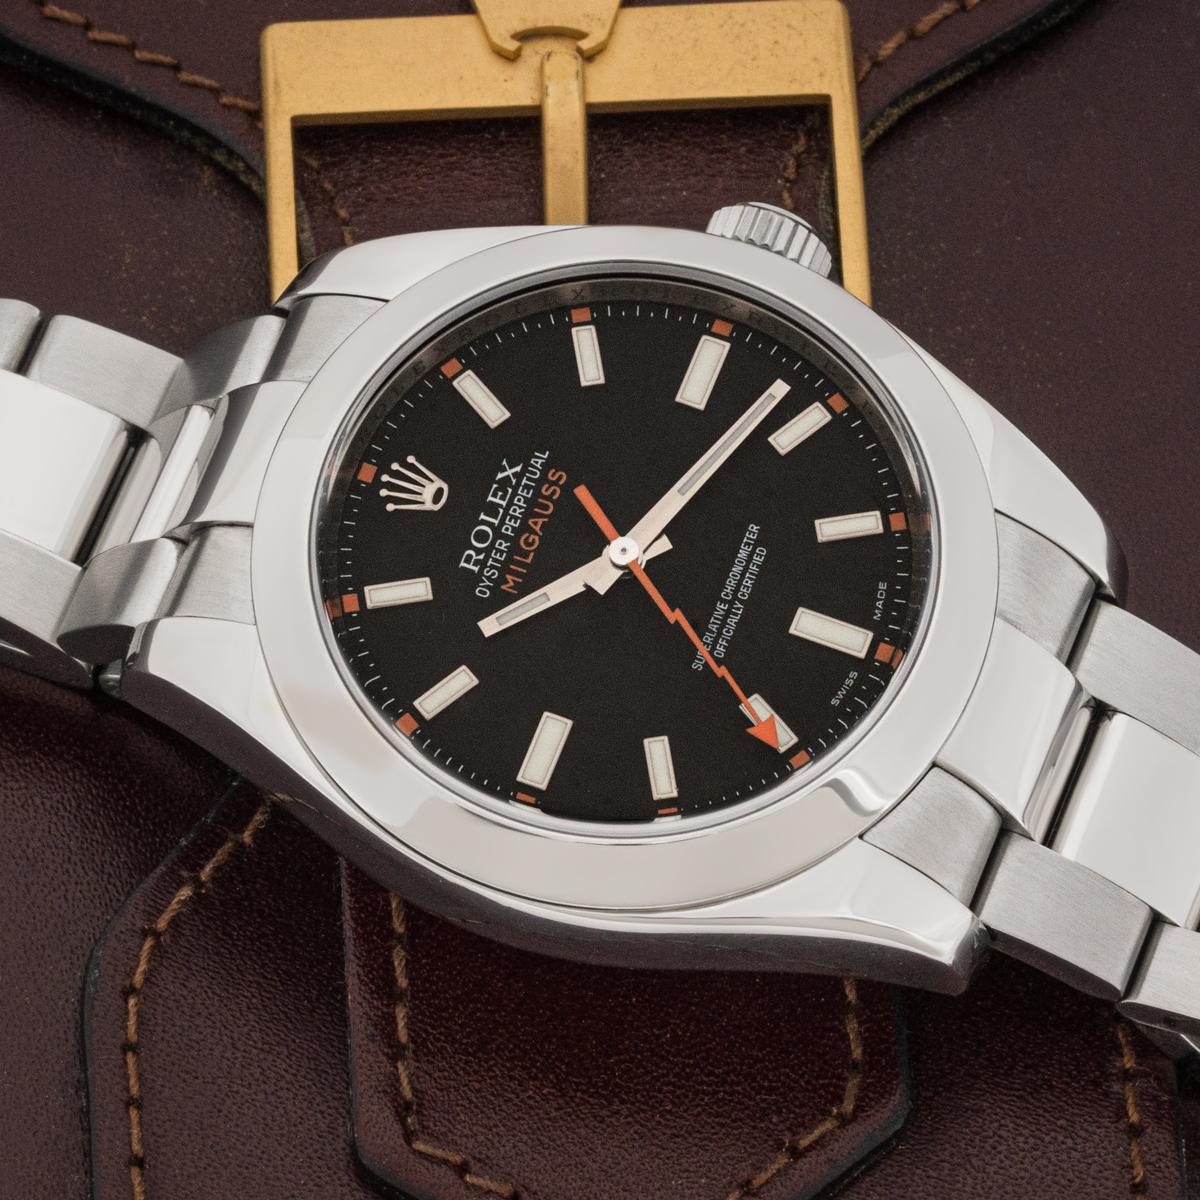 A 40mm Milgauss crafted in stainless steel from Rolex. Features a black dial with applied hour markers and an orange second hand shaped like a lightning bolt.

Fitted with a sapphire glass, a self-winding automatic movement and an Oyster bracelet